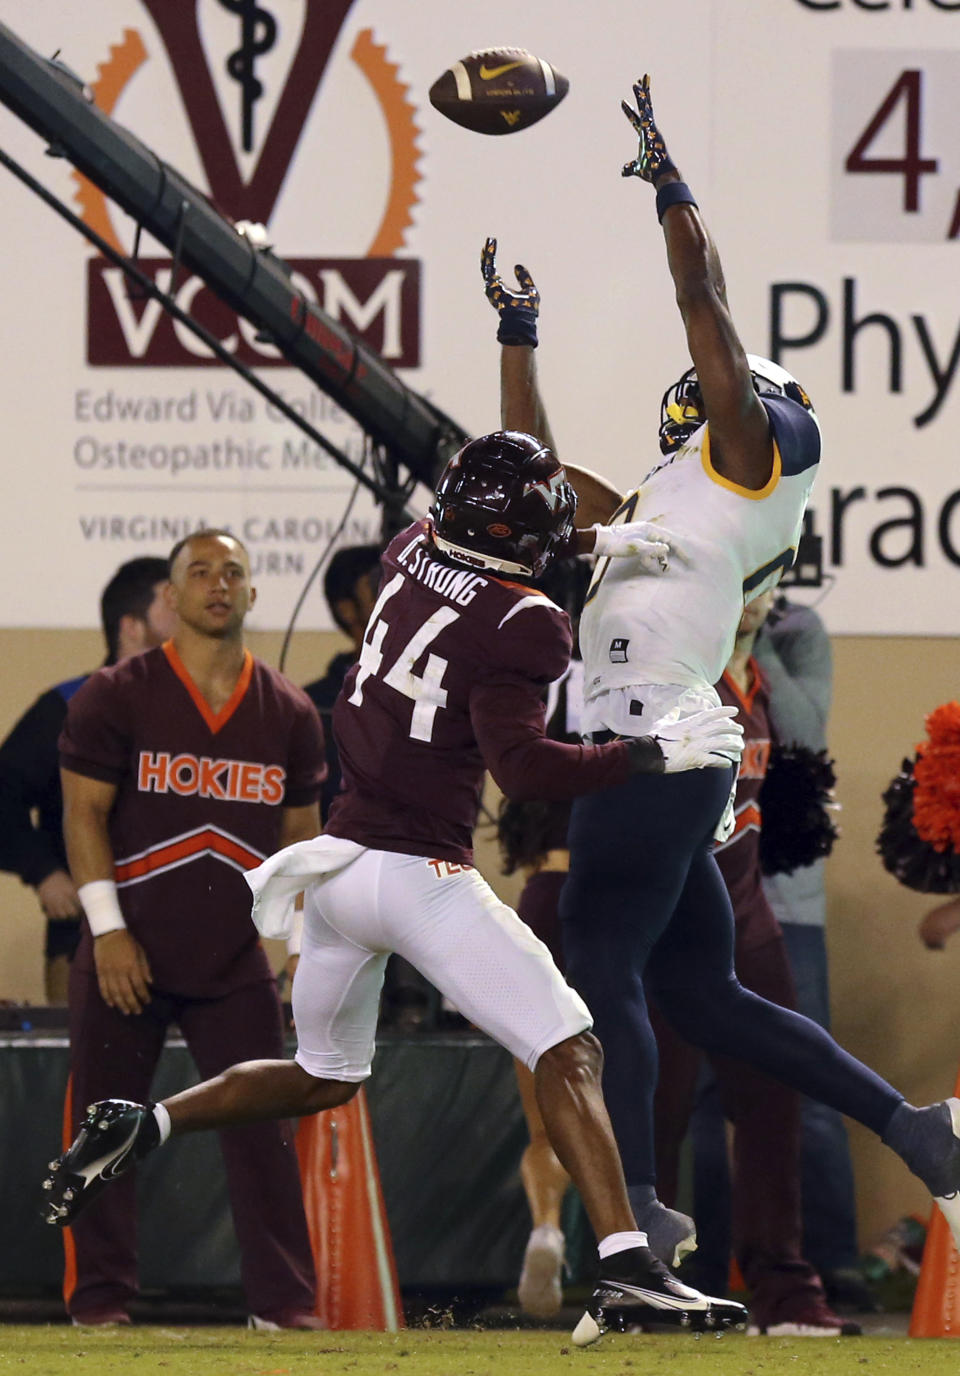 West Virginia wide receiver Bryce Ford-Wheaton (0) attempts to catch a pass as Virginia Tech's Dorian Strong (44) defends during the first half of an NCAA college football game Thursday, Sept. 22, 2022, in Blacksburg, Va. (Matt Gentry/The Roanoke Times via AP)